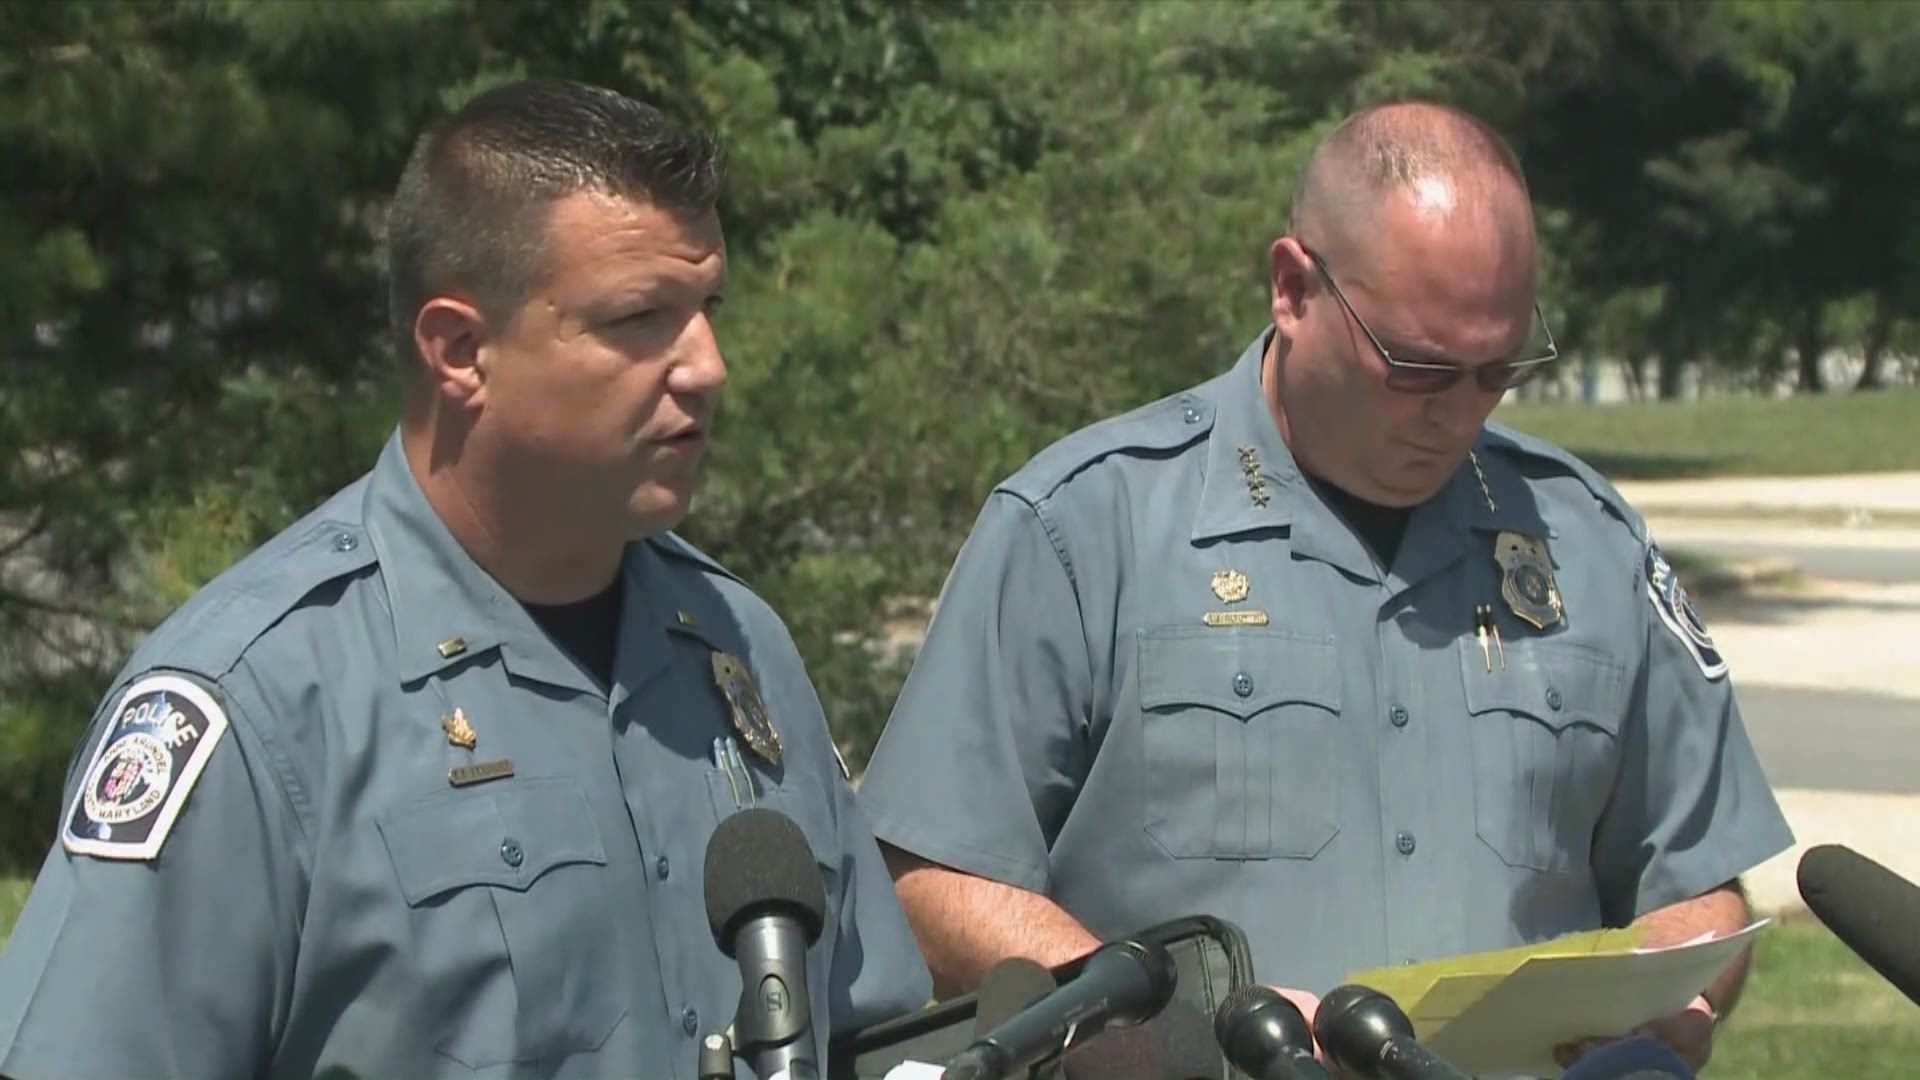 Anna Arundel police held a news conference the morning after the Capital Gazette shooting